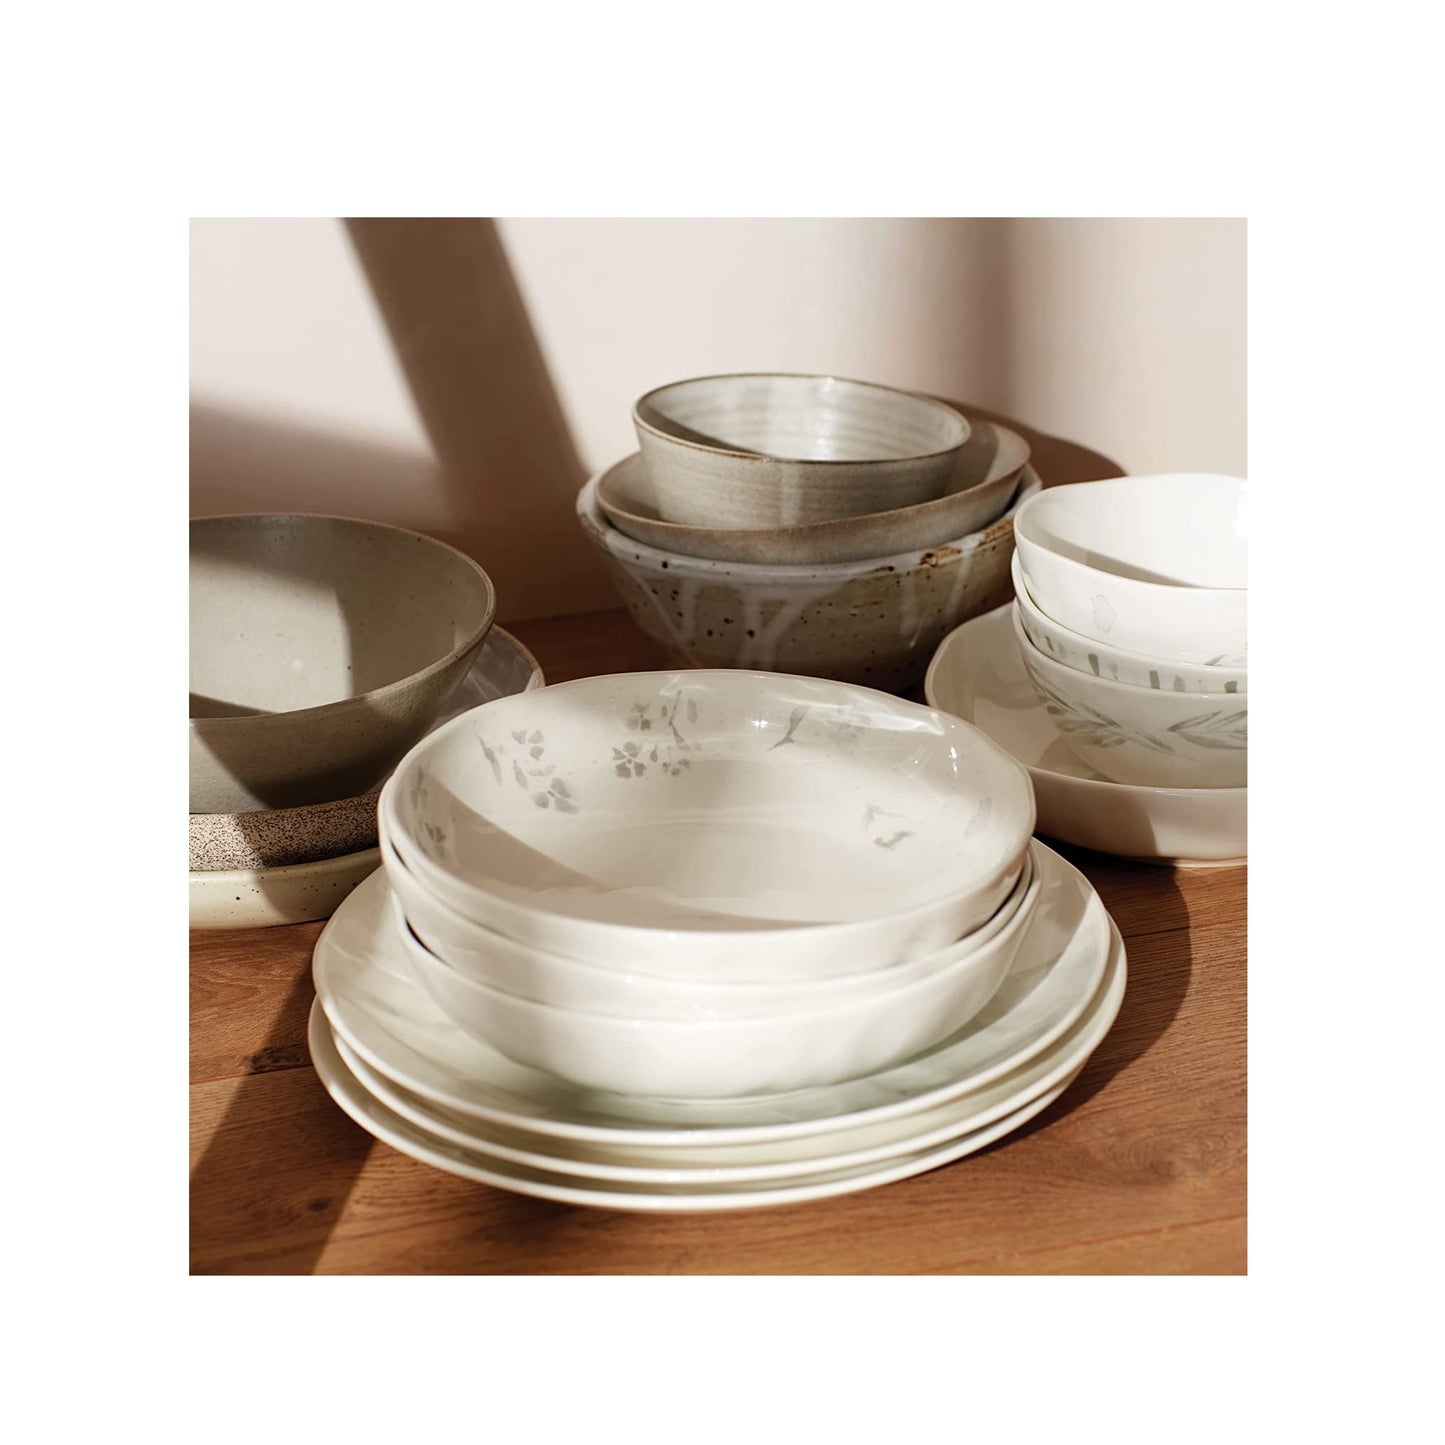 Oyster Bay Pasta Bowls, Set of 4 by Lenox